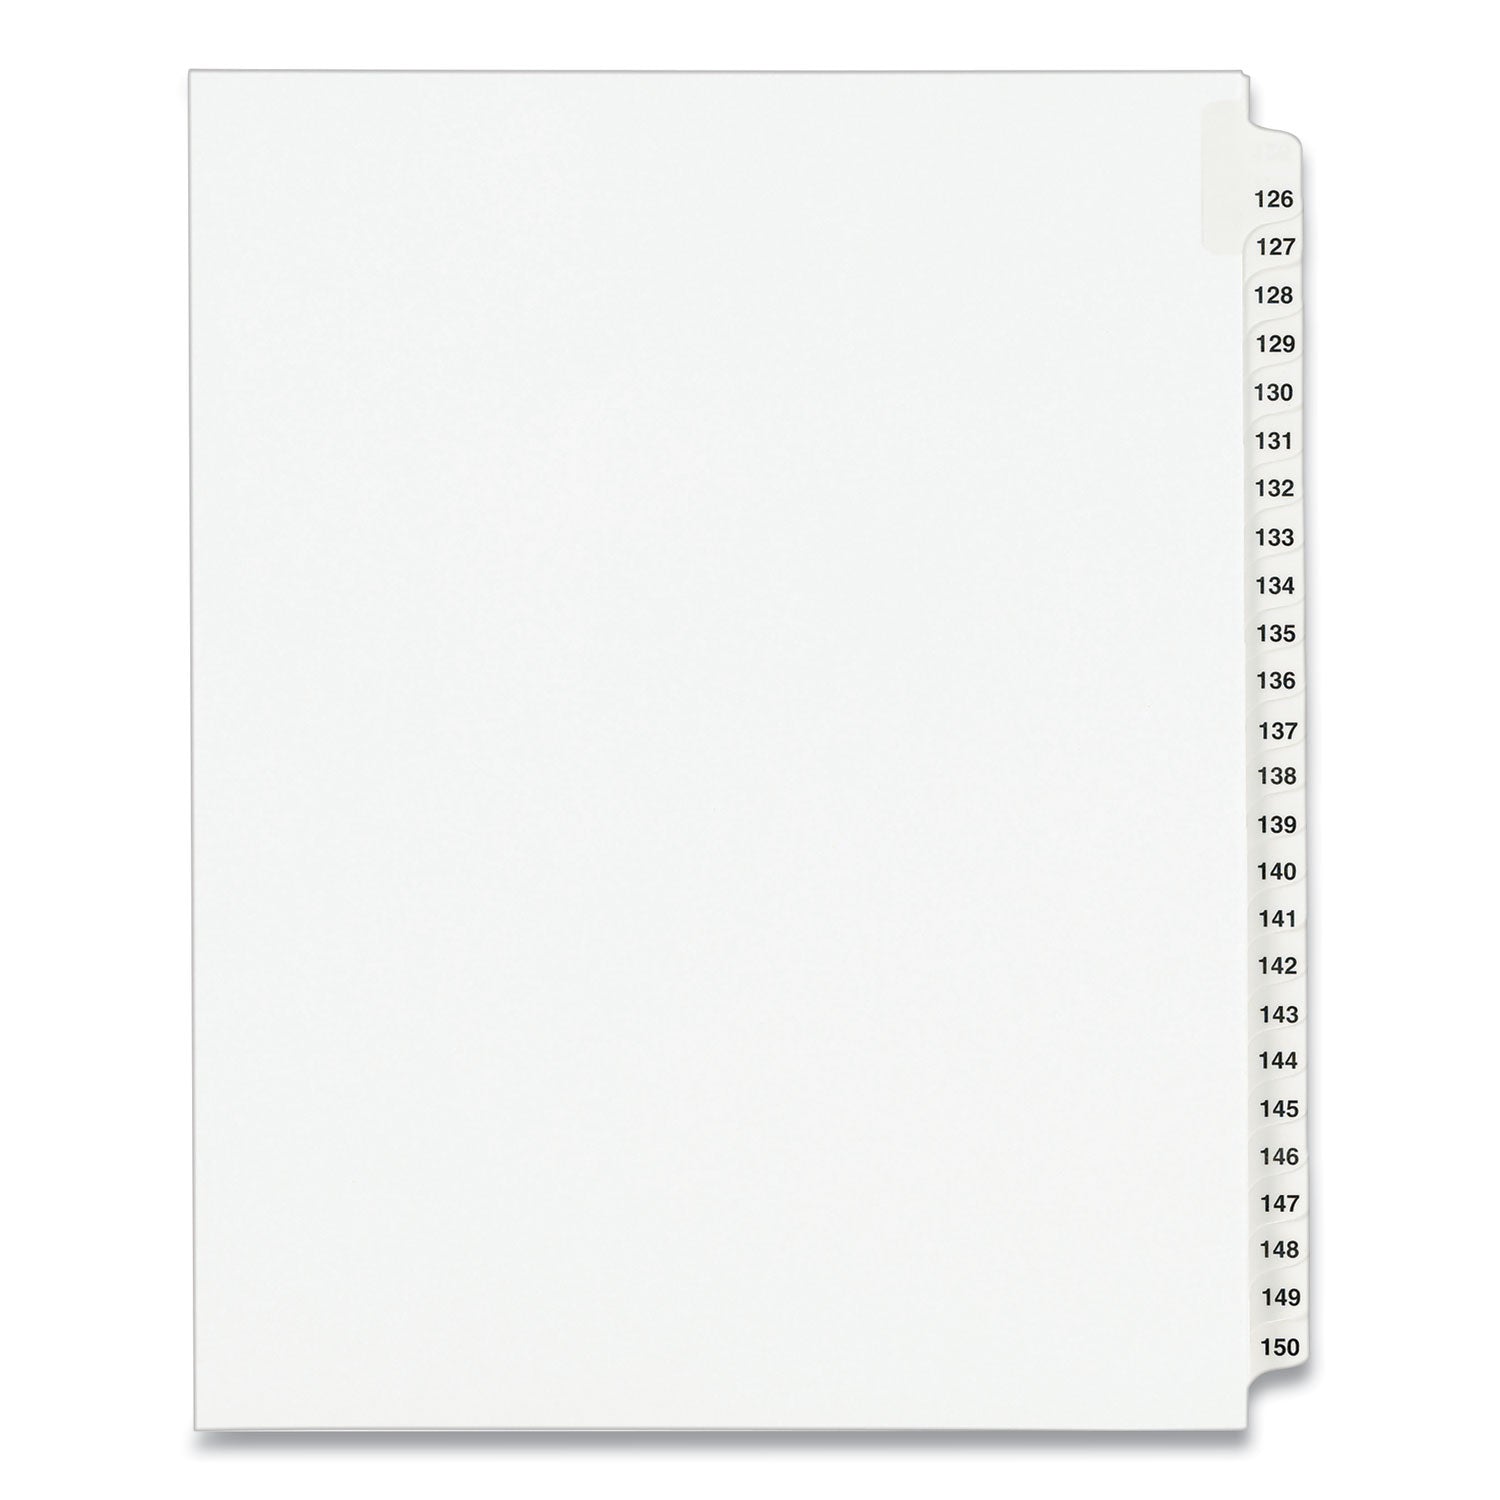 Preprinted Legal Exhibit Side Tab Index Dividers, Avery Style, 25-Tab, 126 to 150, 11 x 8.5, White, 1 Set, (1335) - 